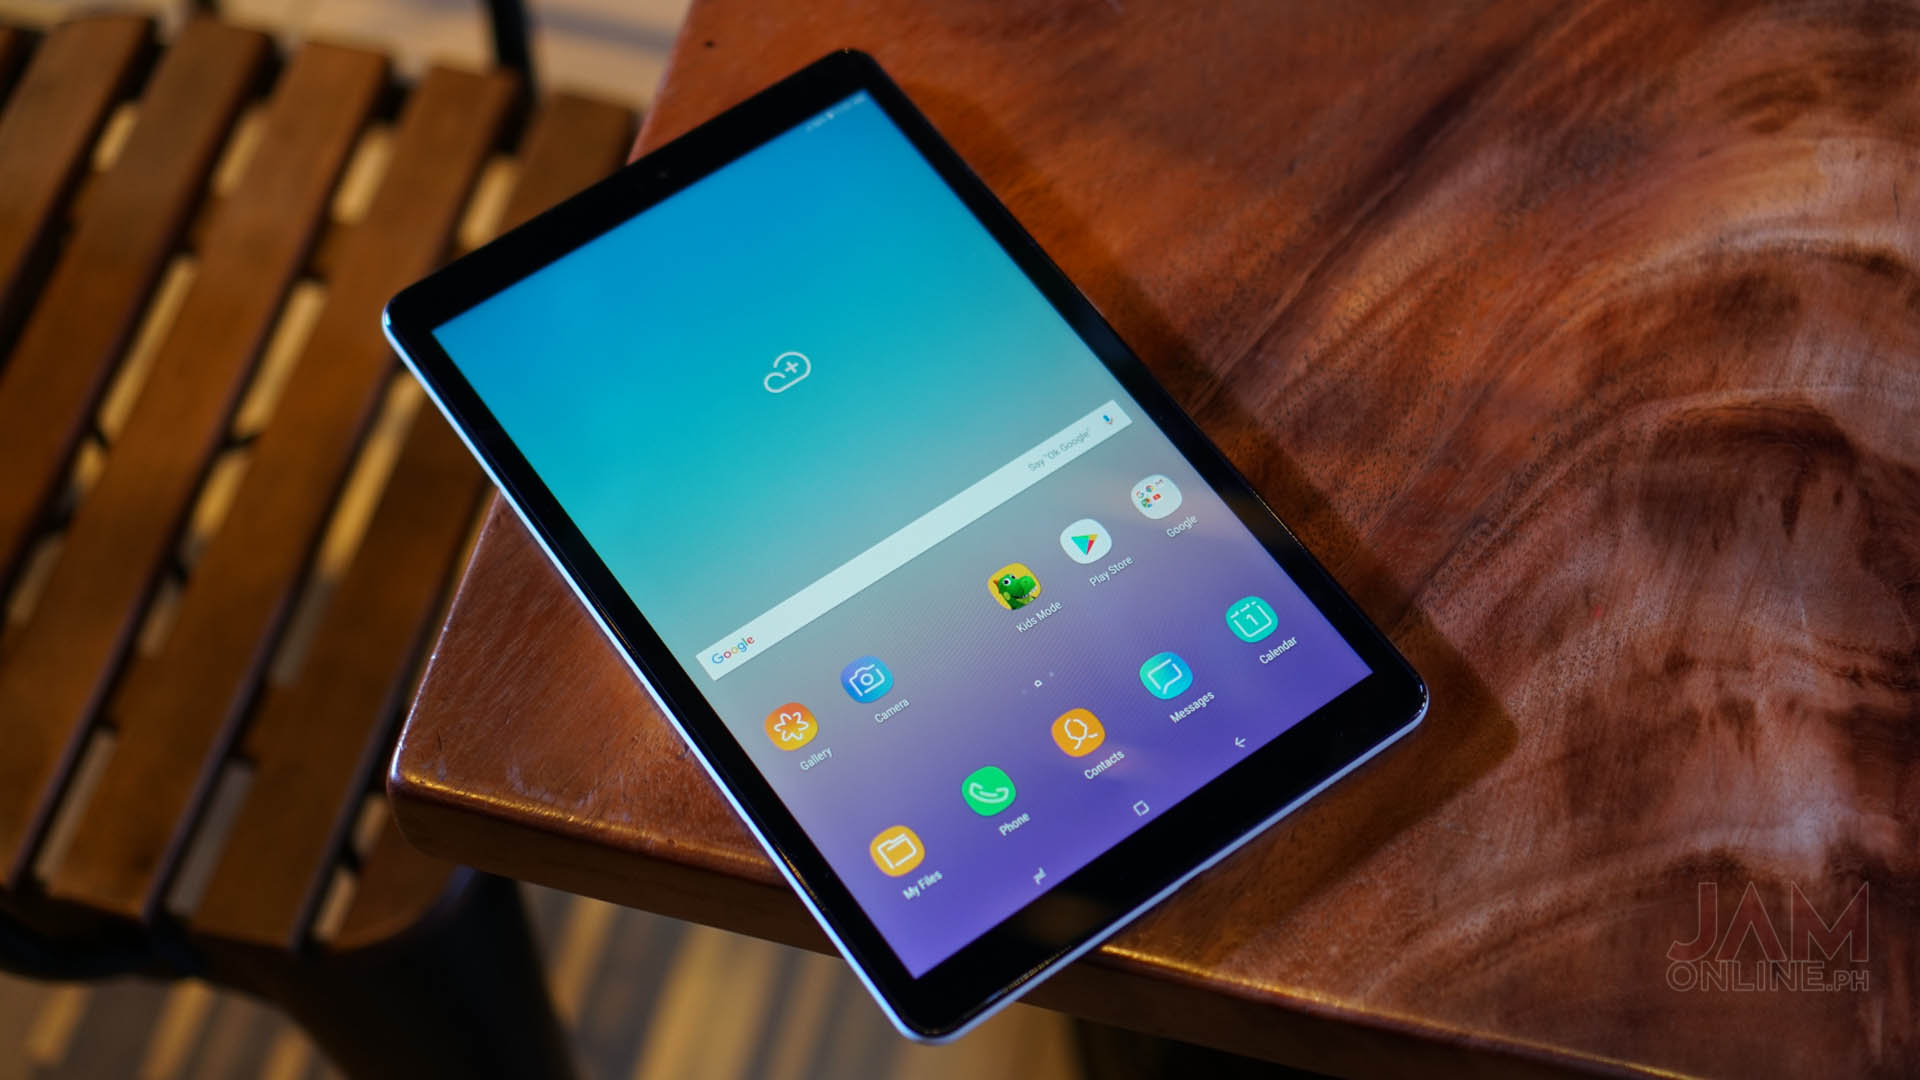 Samsung Galaxy Tab A 10 5 Launches In The Philippines Jam Online Philippines Tech News Reviews